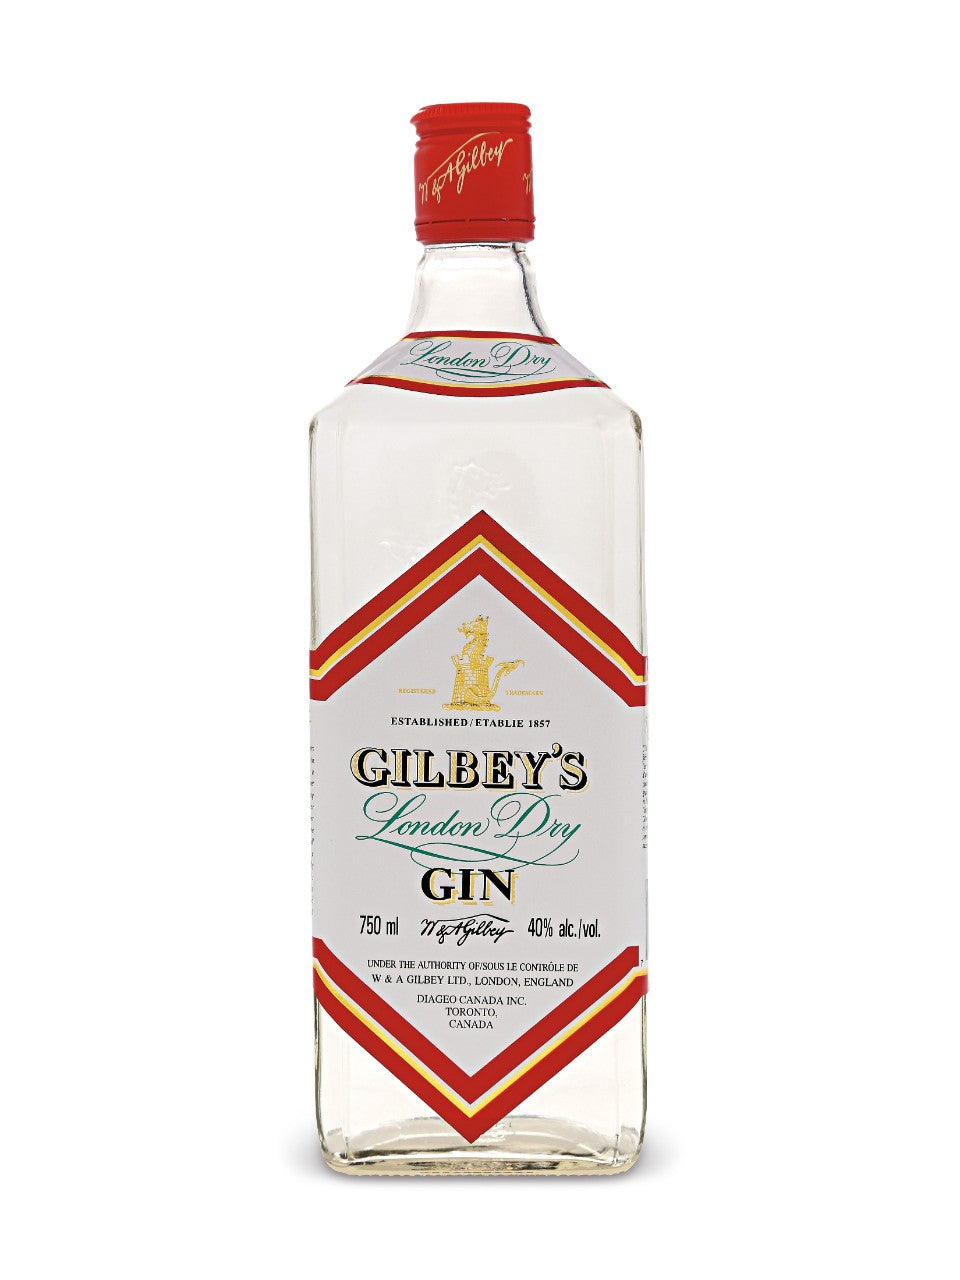 GILBEY'S LONDON DRY GIN 750mL